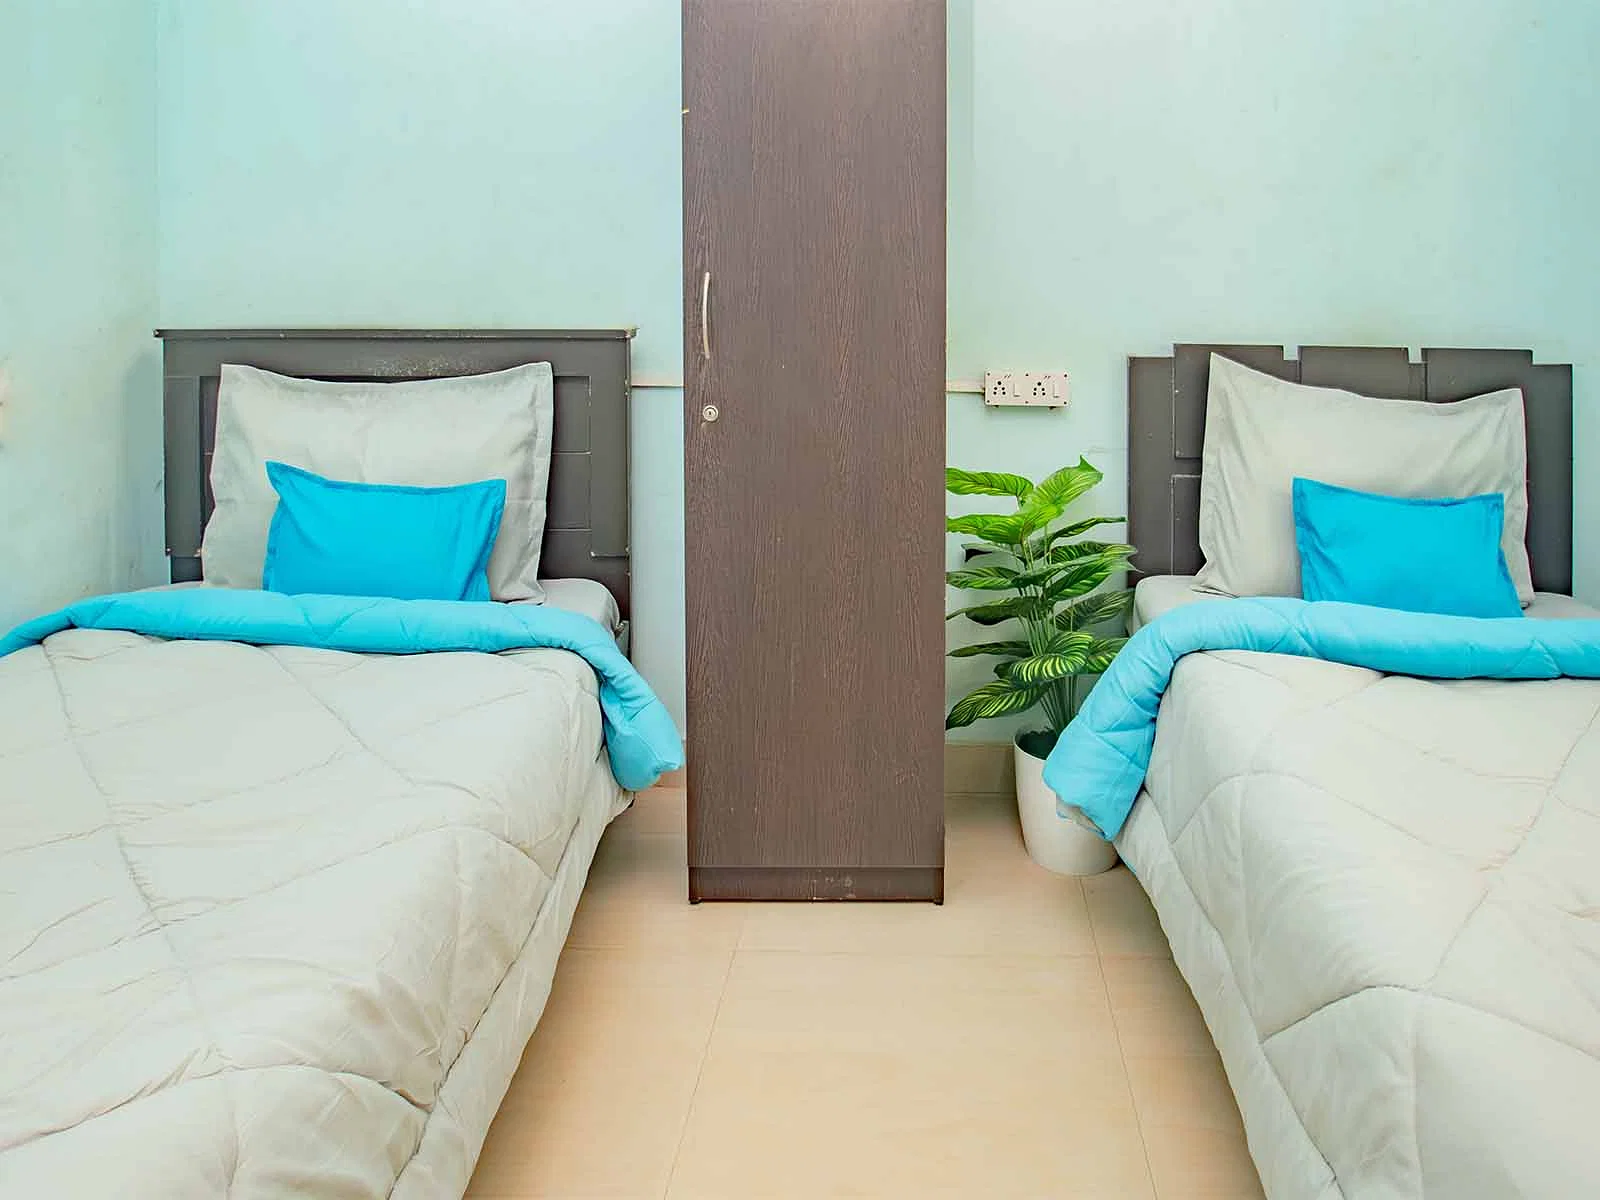 pgs in Whitefield with Daily housekeeping facilities and free Wi-Fi-Zolo Avni